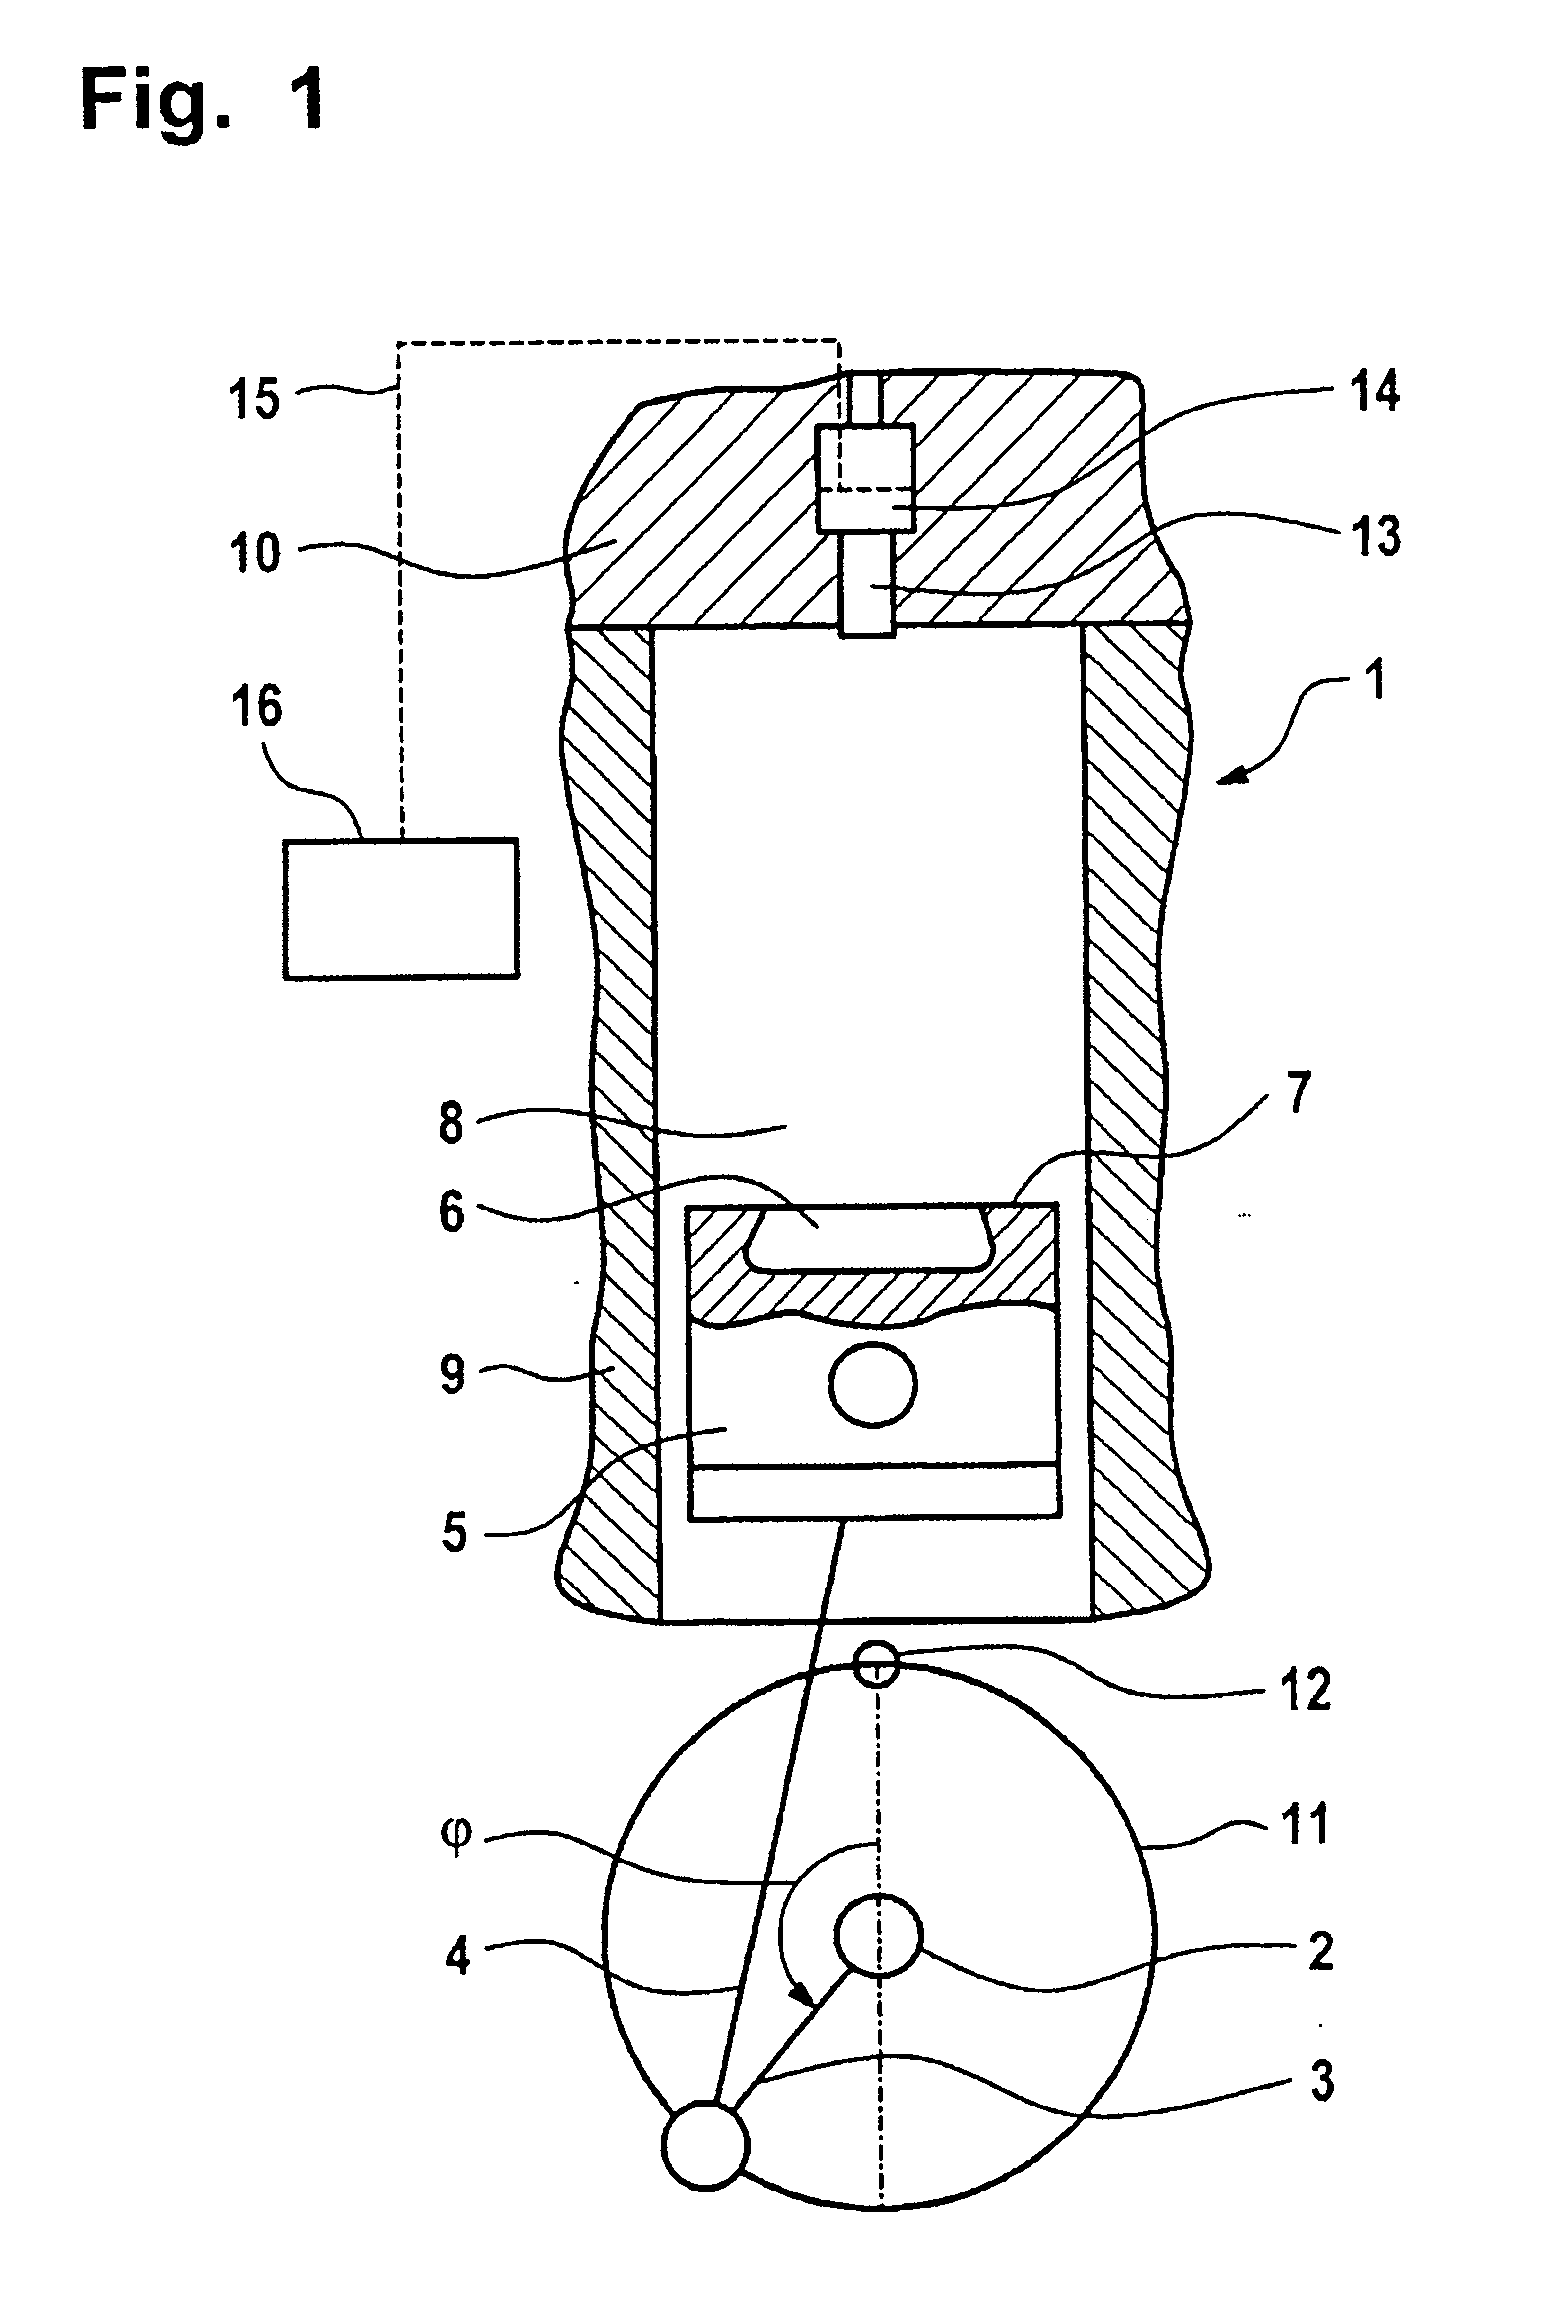 Internal combustion engine with auto ignition